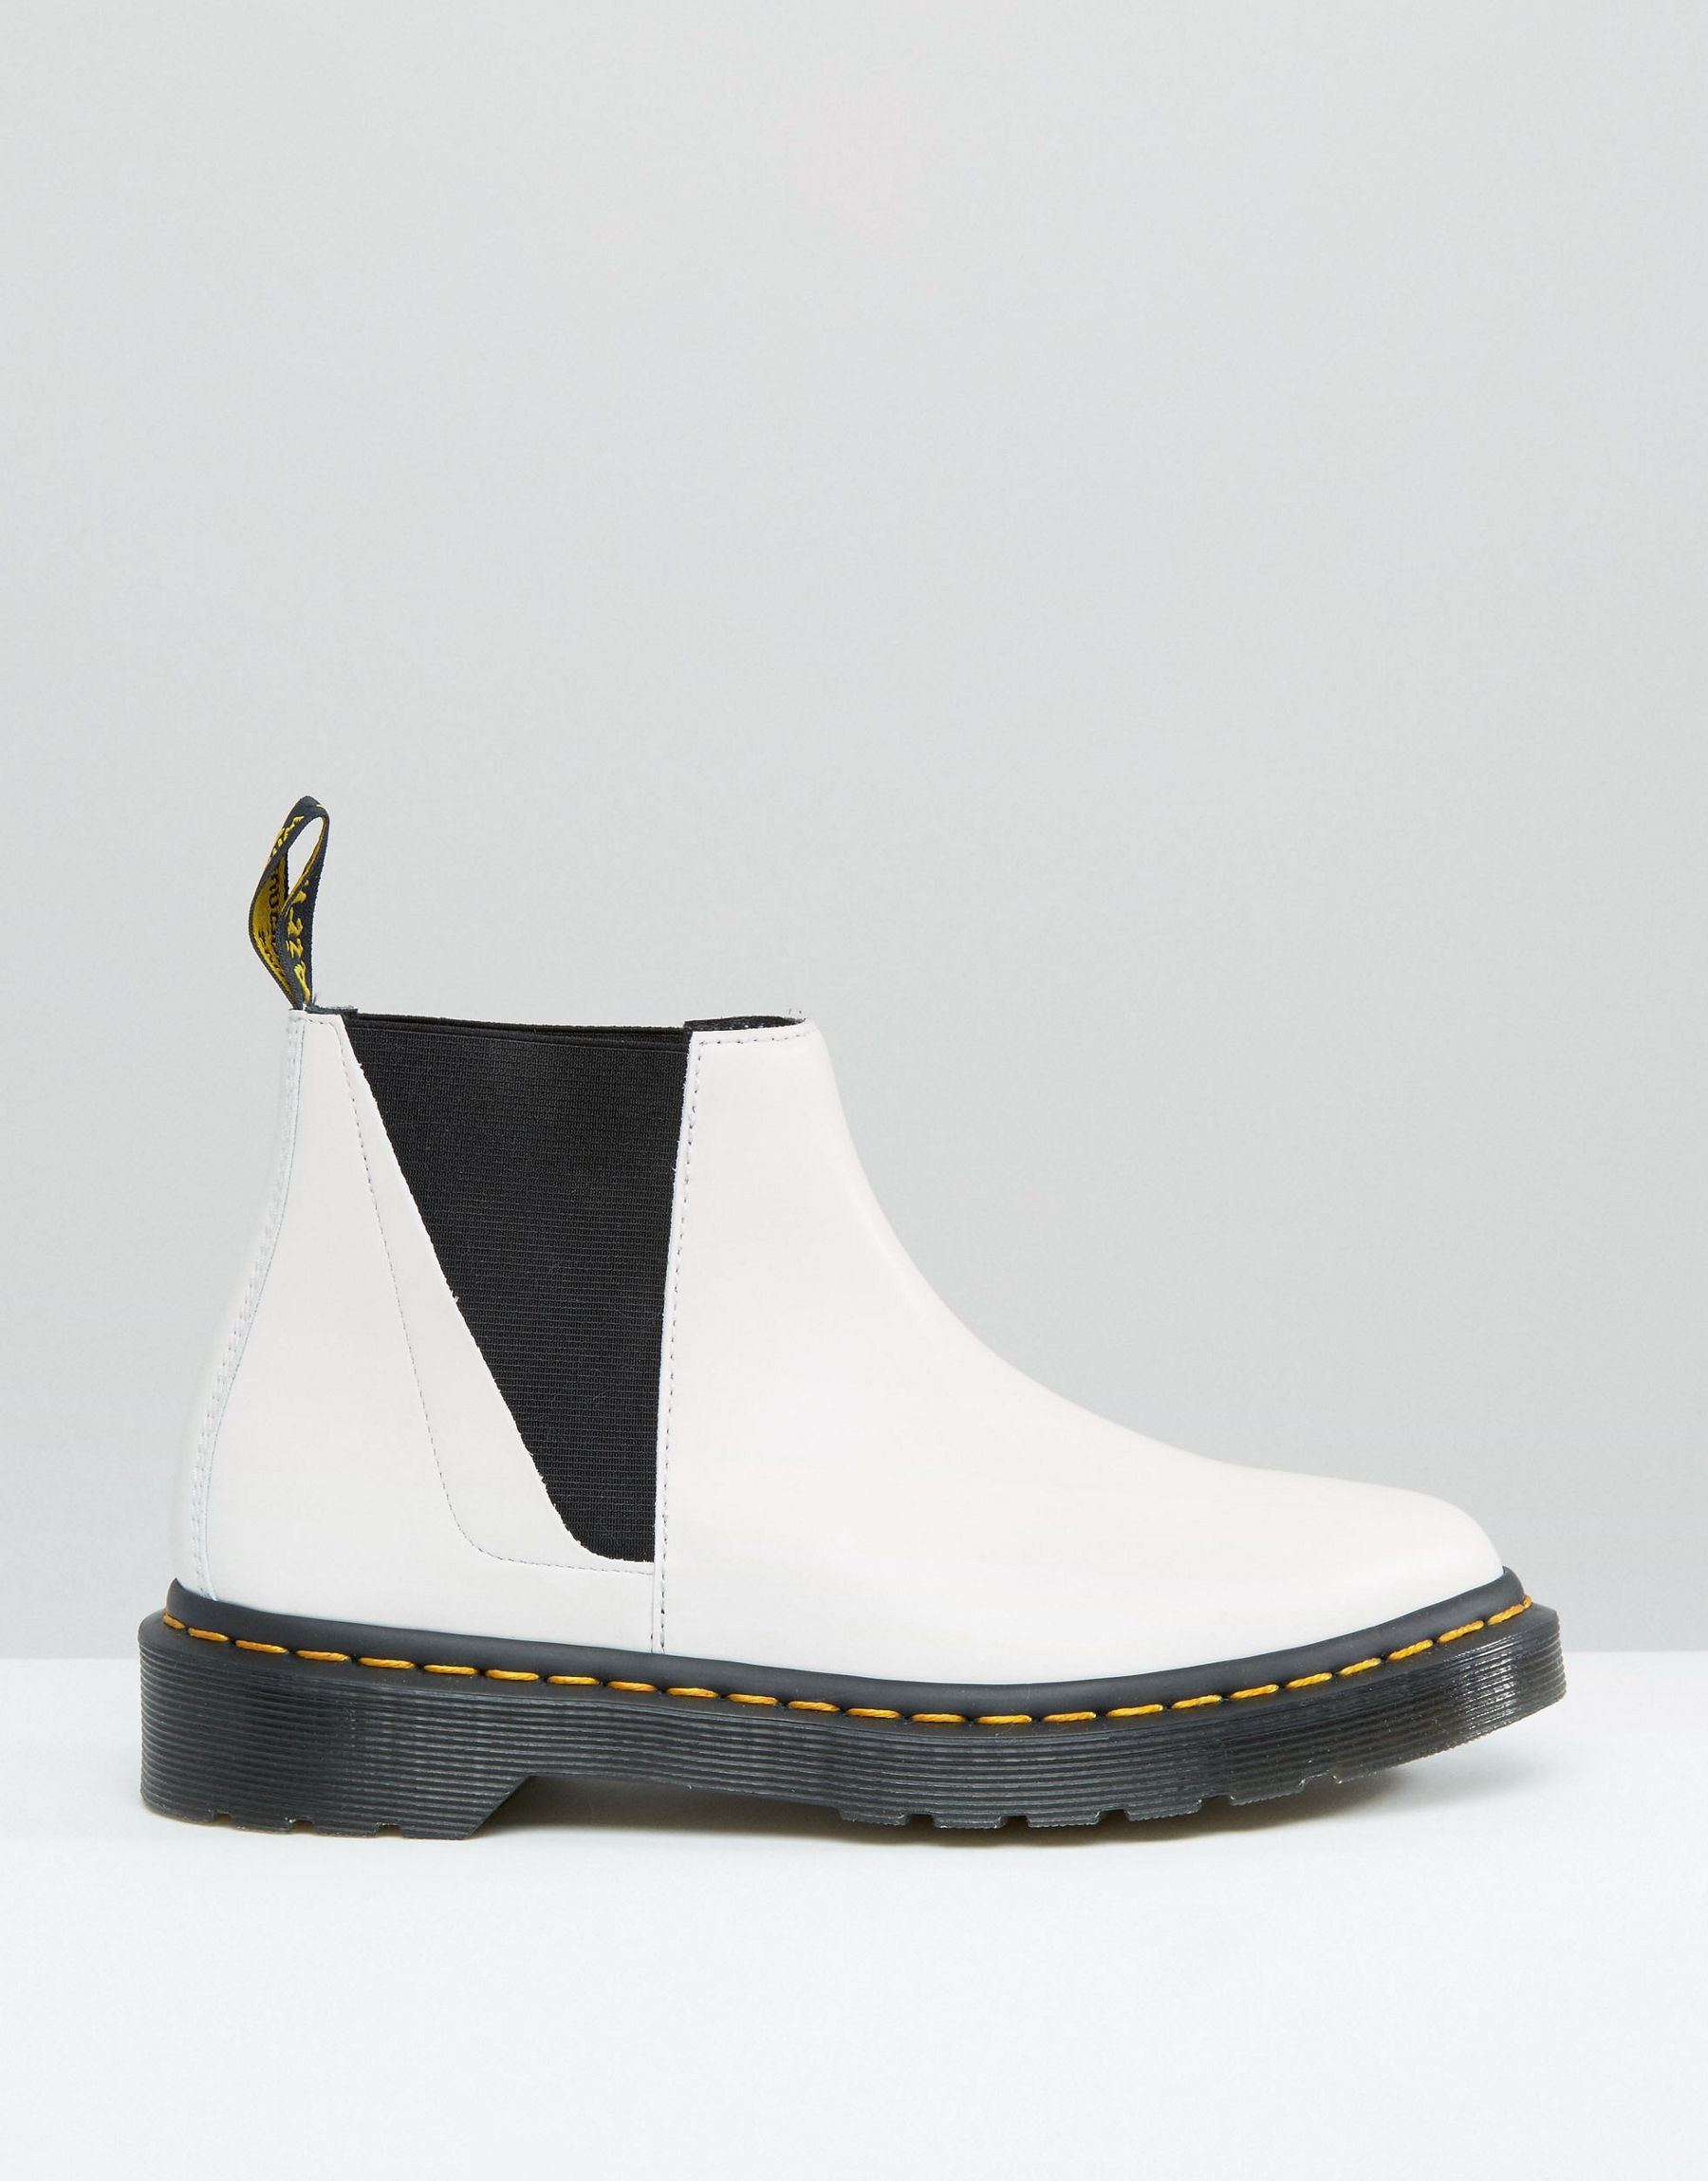 Dr. Martens Leather Bianca White Chelsea Boots | Lyst